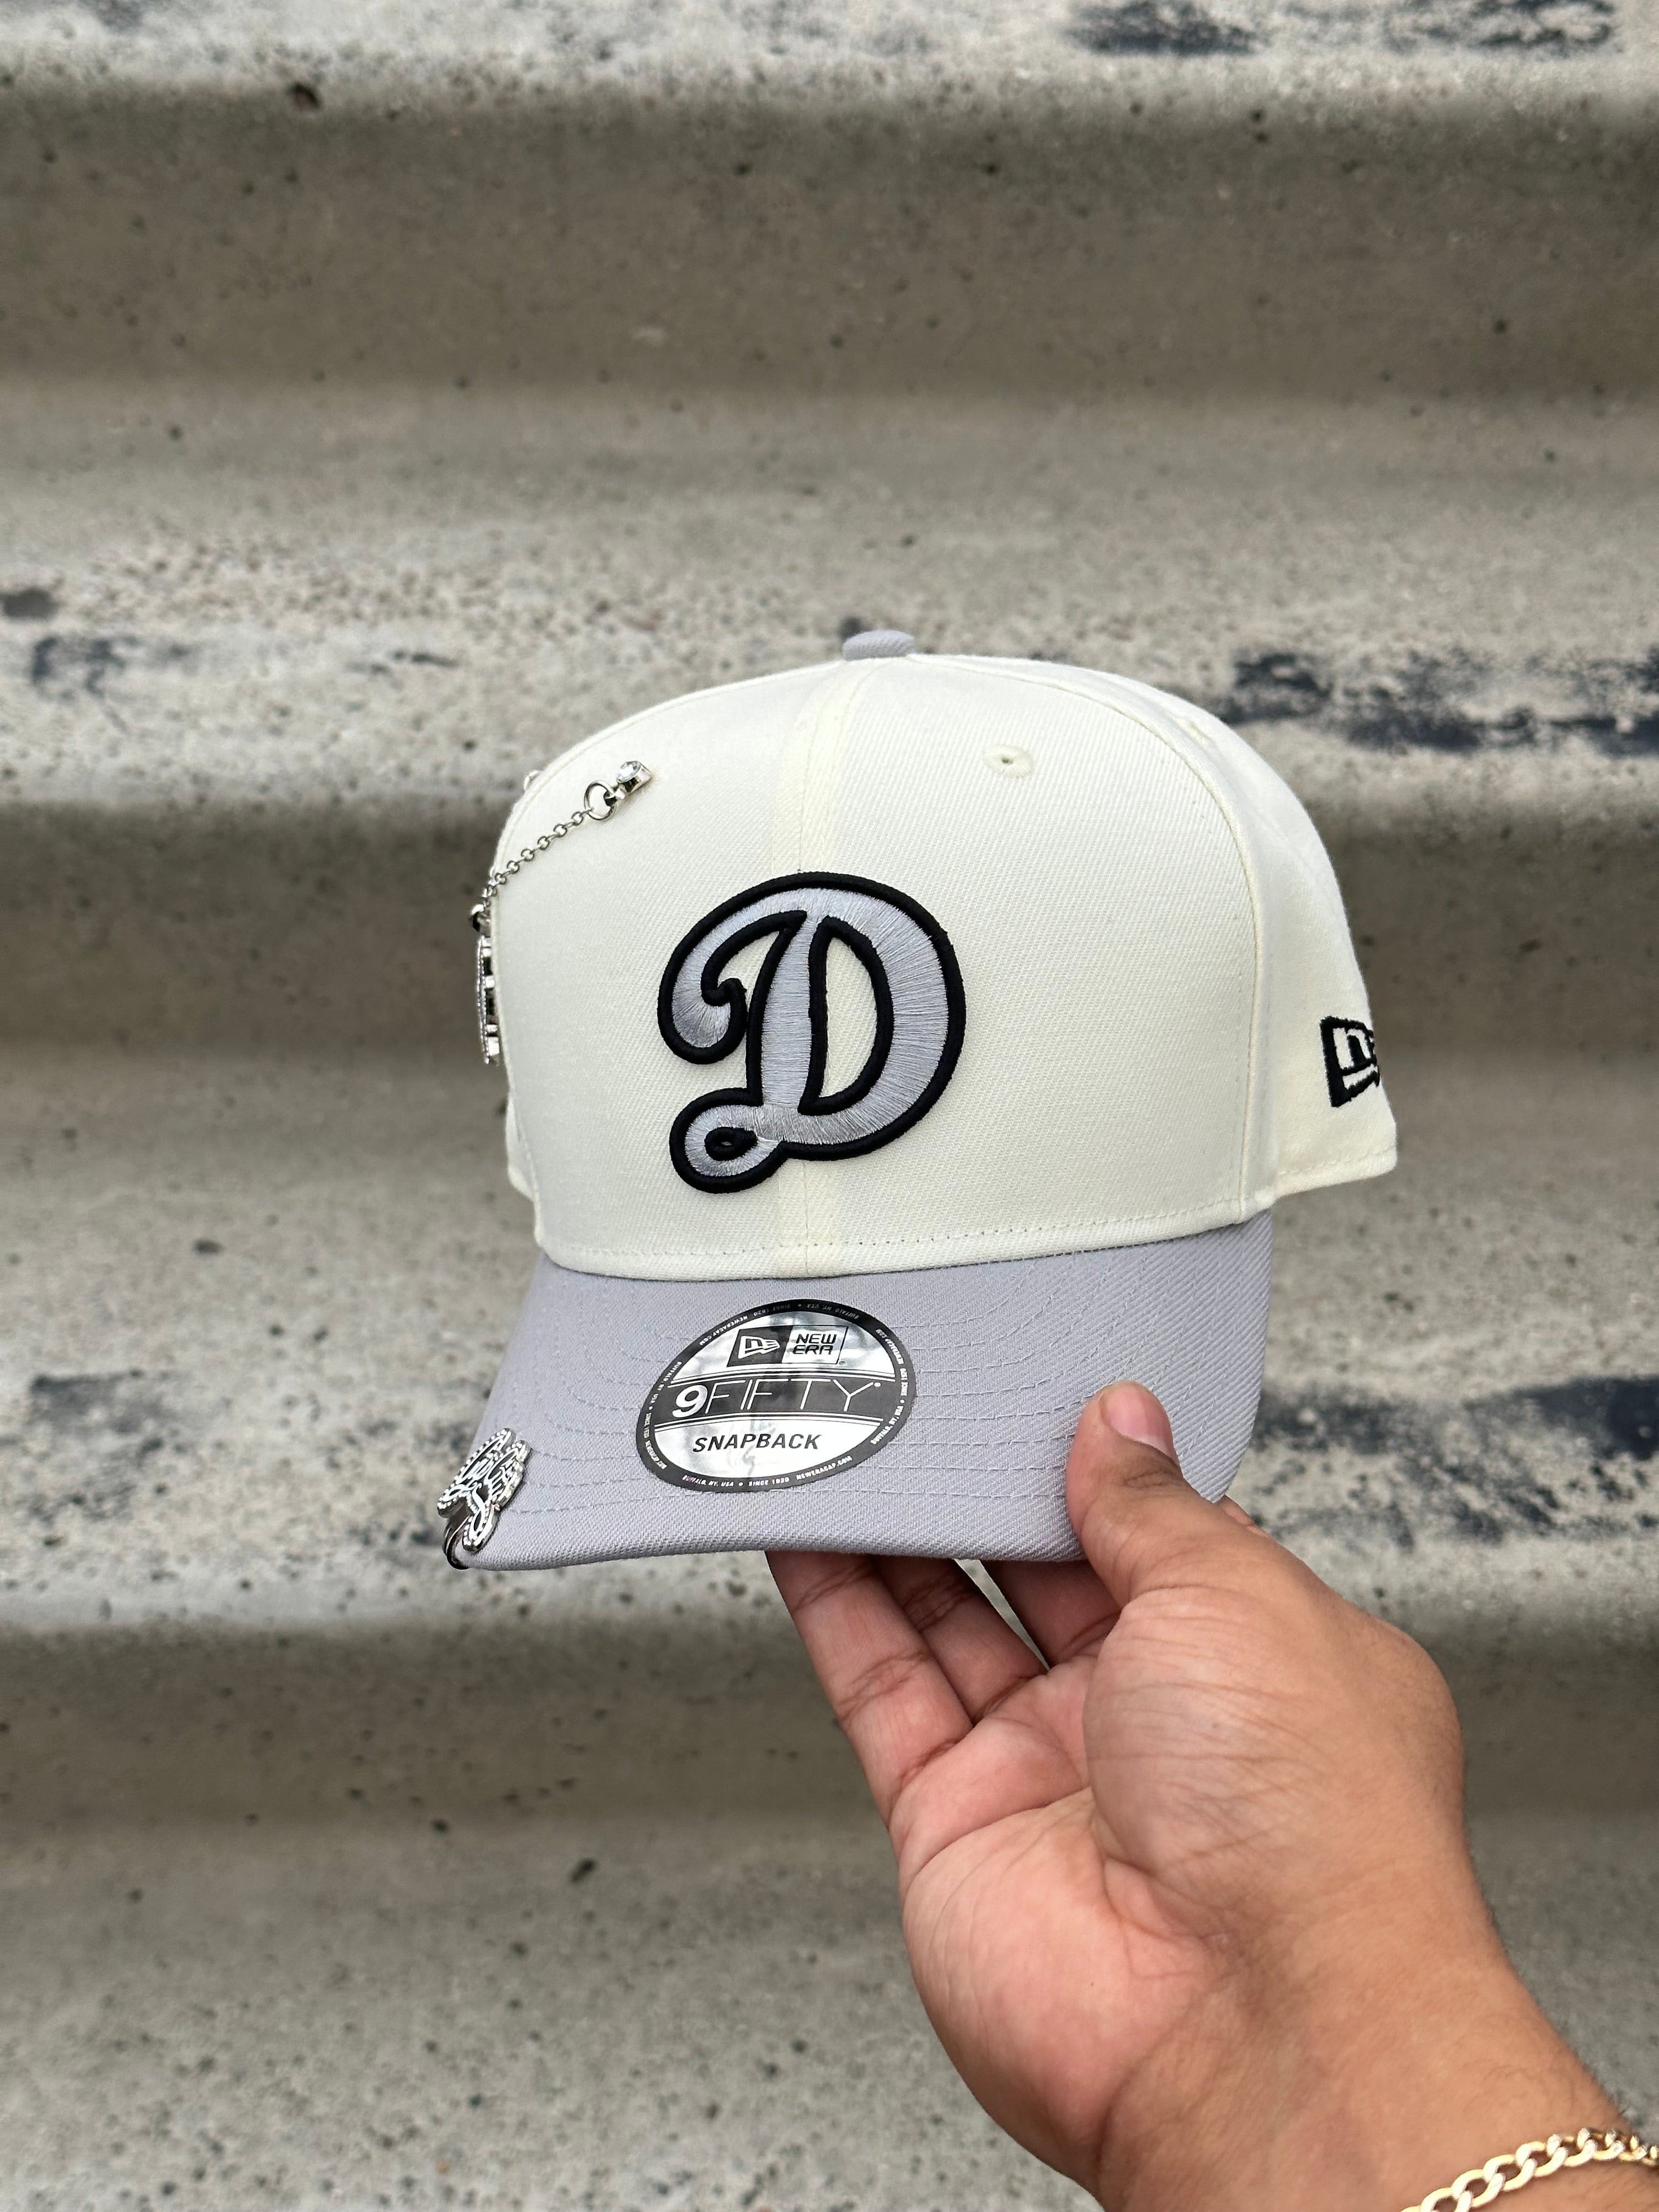 NEW ERA EXCLUSIVE 9FIFTY CHROME WHITE/GREY LOS ANGELES DODGERS SNAPBACK W/ 60TH ANNIVERSARY PATCH